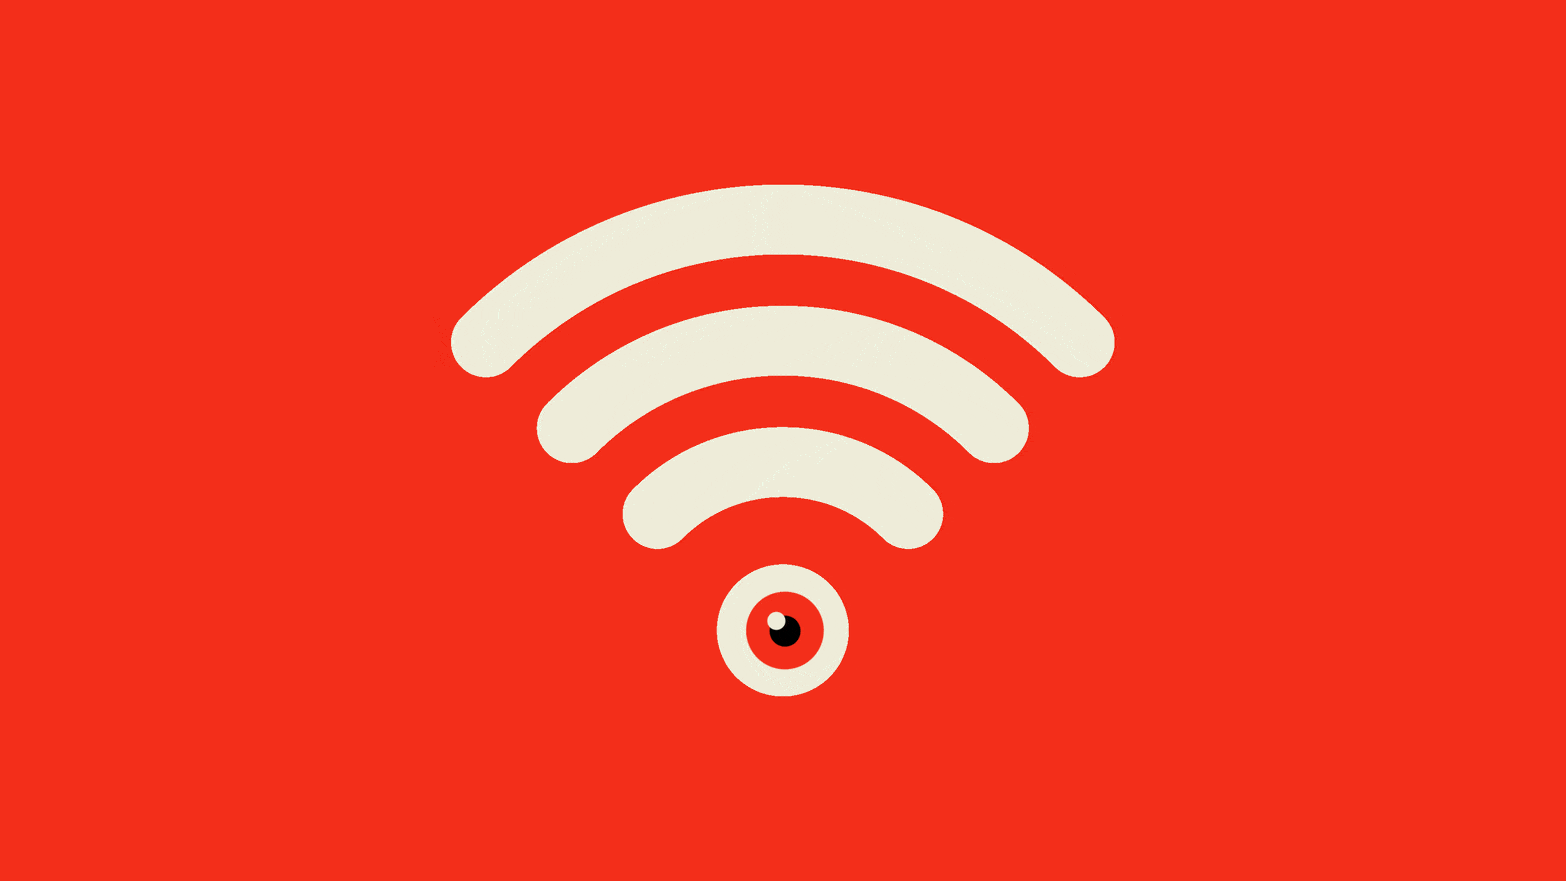 Illustrated gif of the wifi symbol with the bottom dot as an eye going side to side and blinking